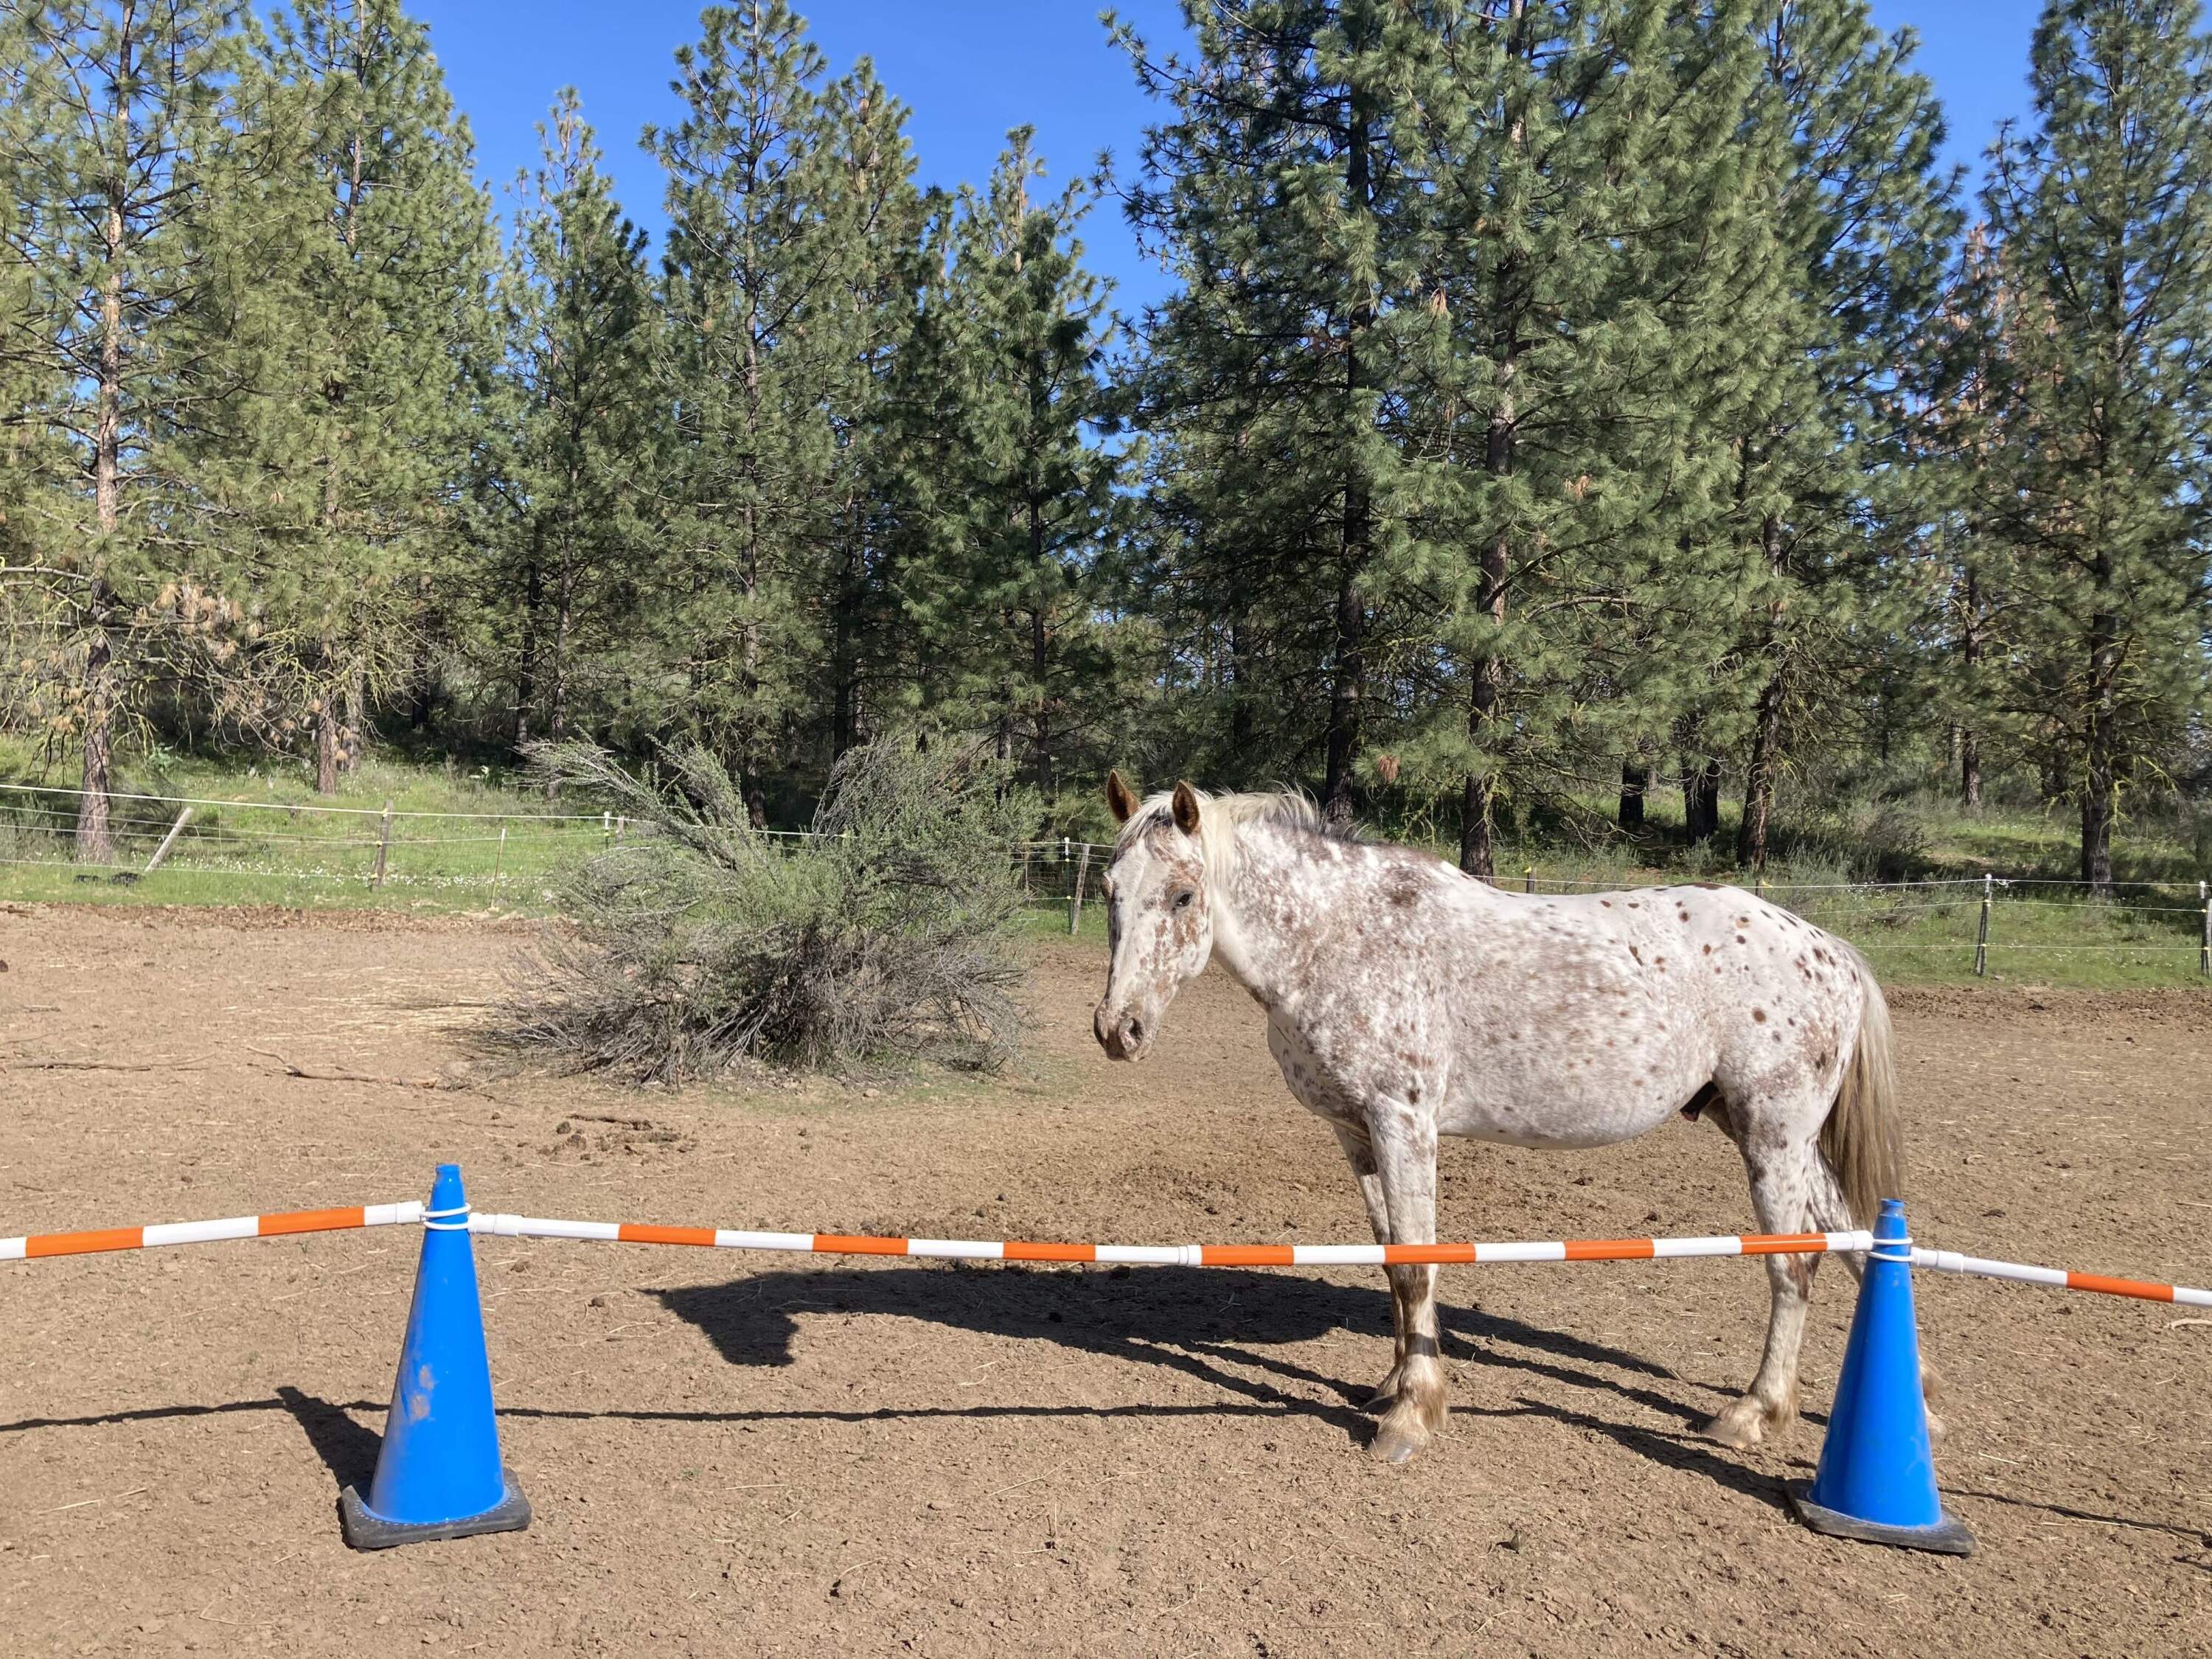 A training session with Jack, the appaloosa mustang Allison Burke rescued and plans to rehome through her program, Spqni Equines in Transition. (Ashley Ahearn)